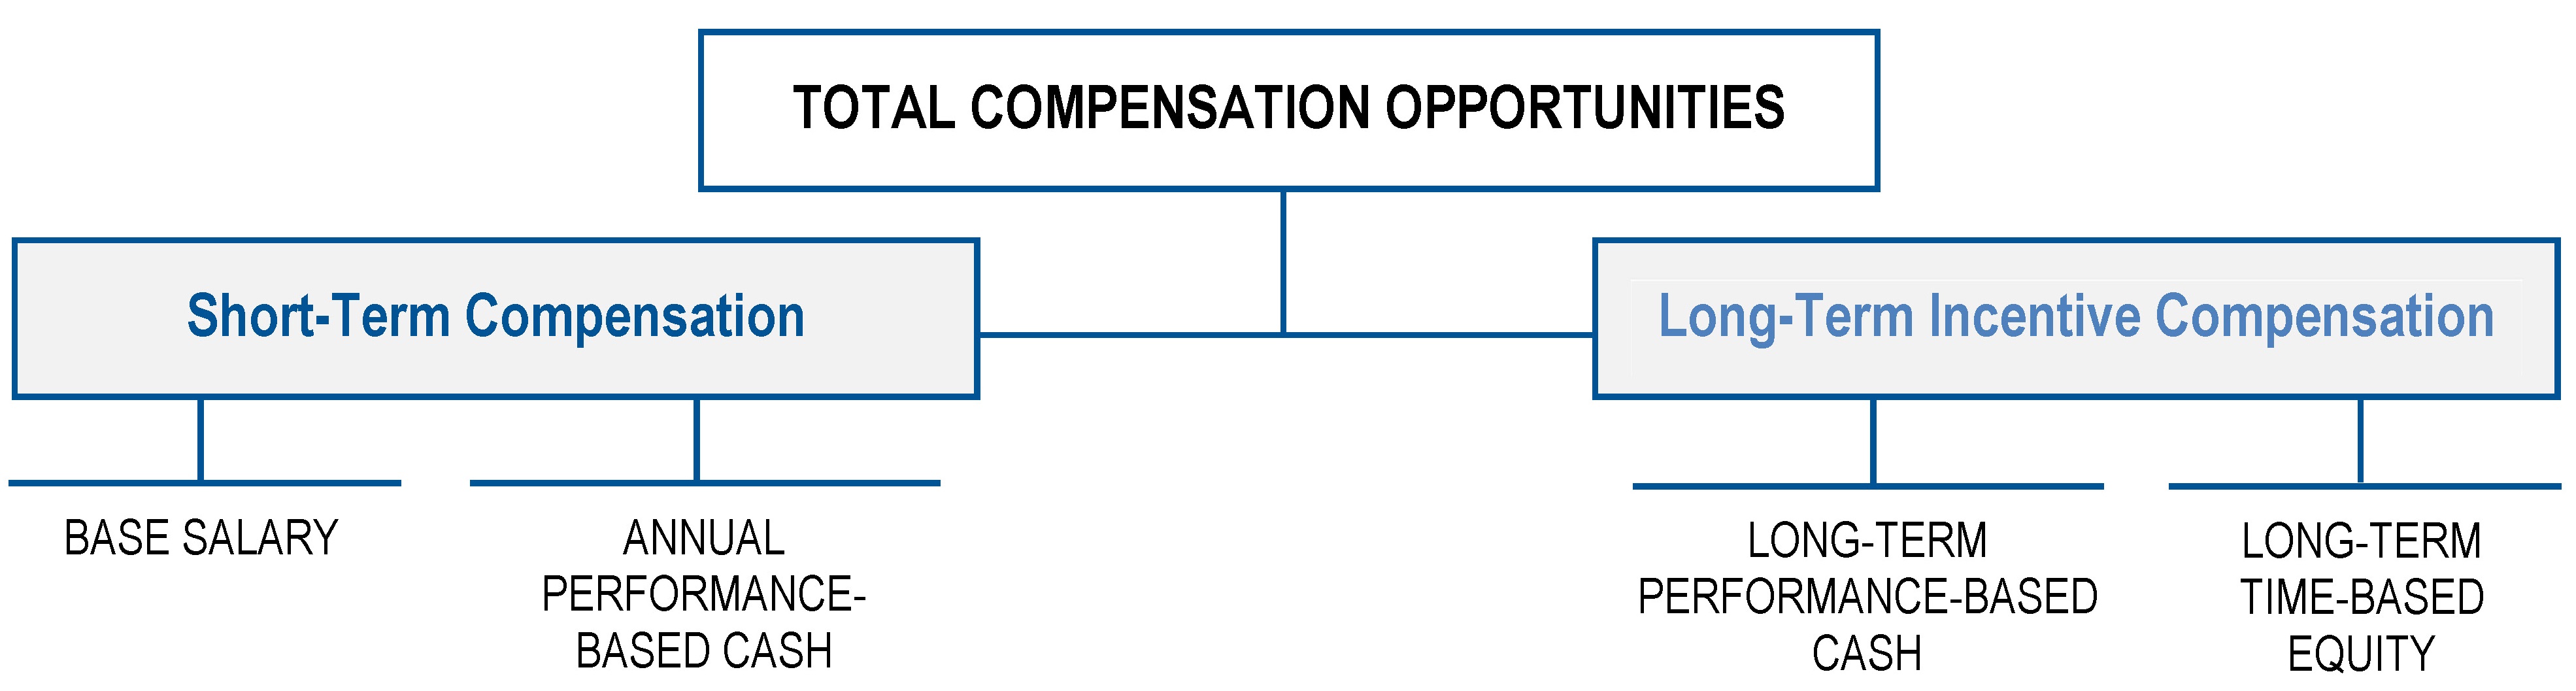 Comp Structure Graphic.jpg